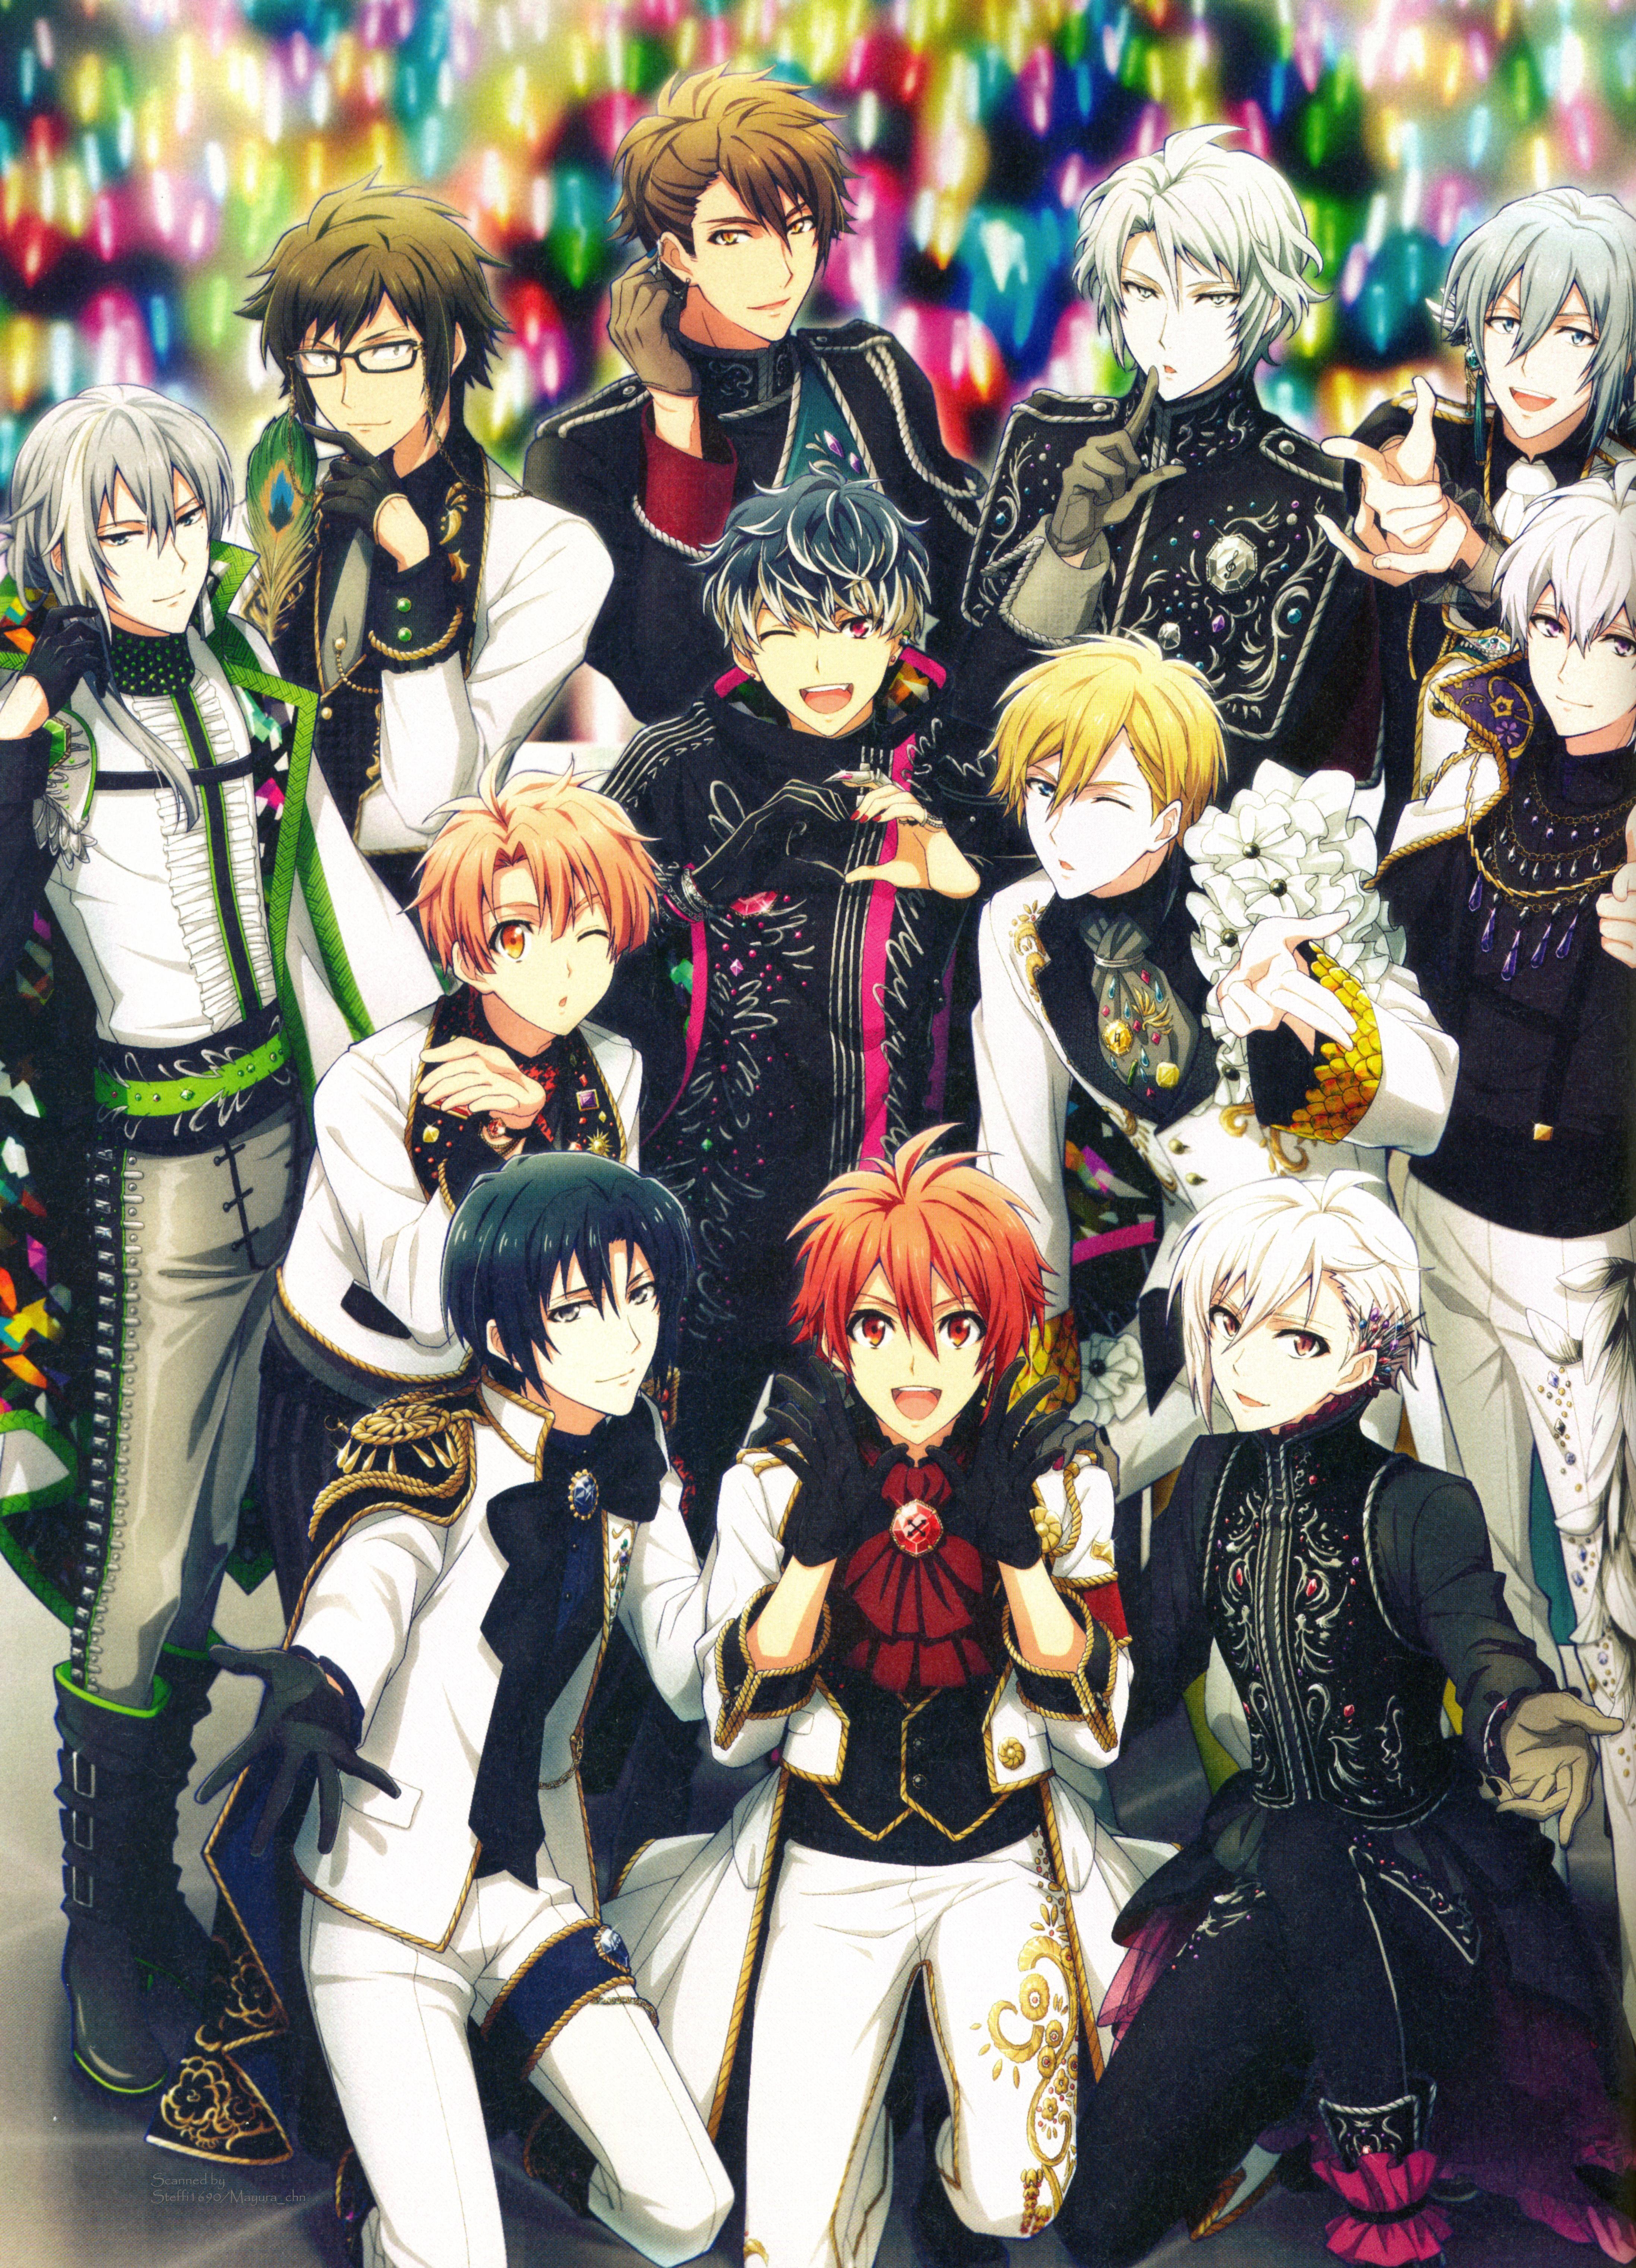 IDOLiSH7 and Scan Gallery